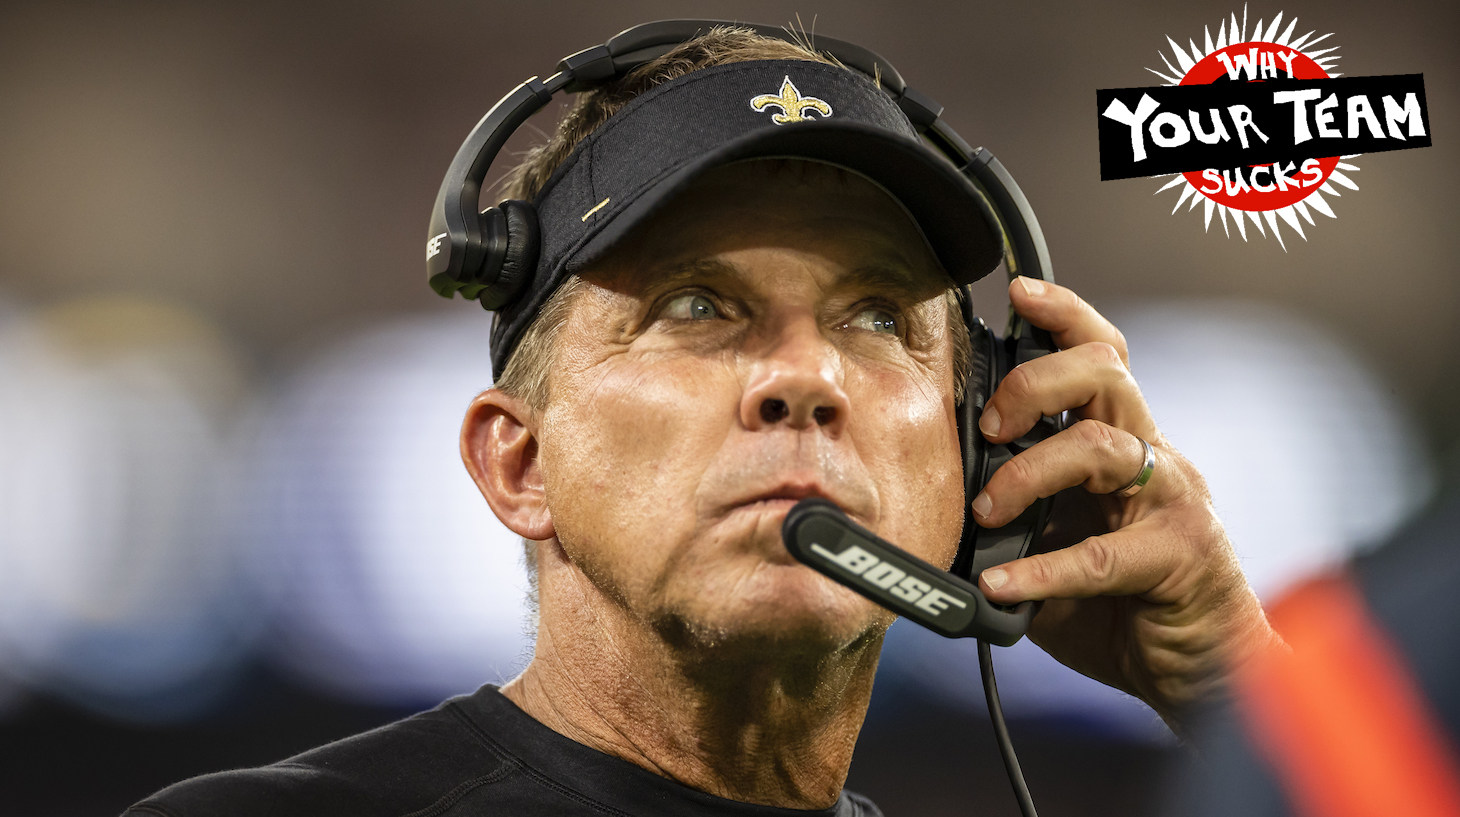 BALTIMORE, MD - AUGUST 14: Head coach Sean Payton of the New Orleans Saints looks on during the first half of a preseason game against the Baltimore Ravens at M&T Bank Stadium on August 14, 2021 in Baltimore, Maryland. (Photo by Scott Taetsch/Getty Images)